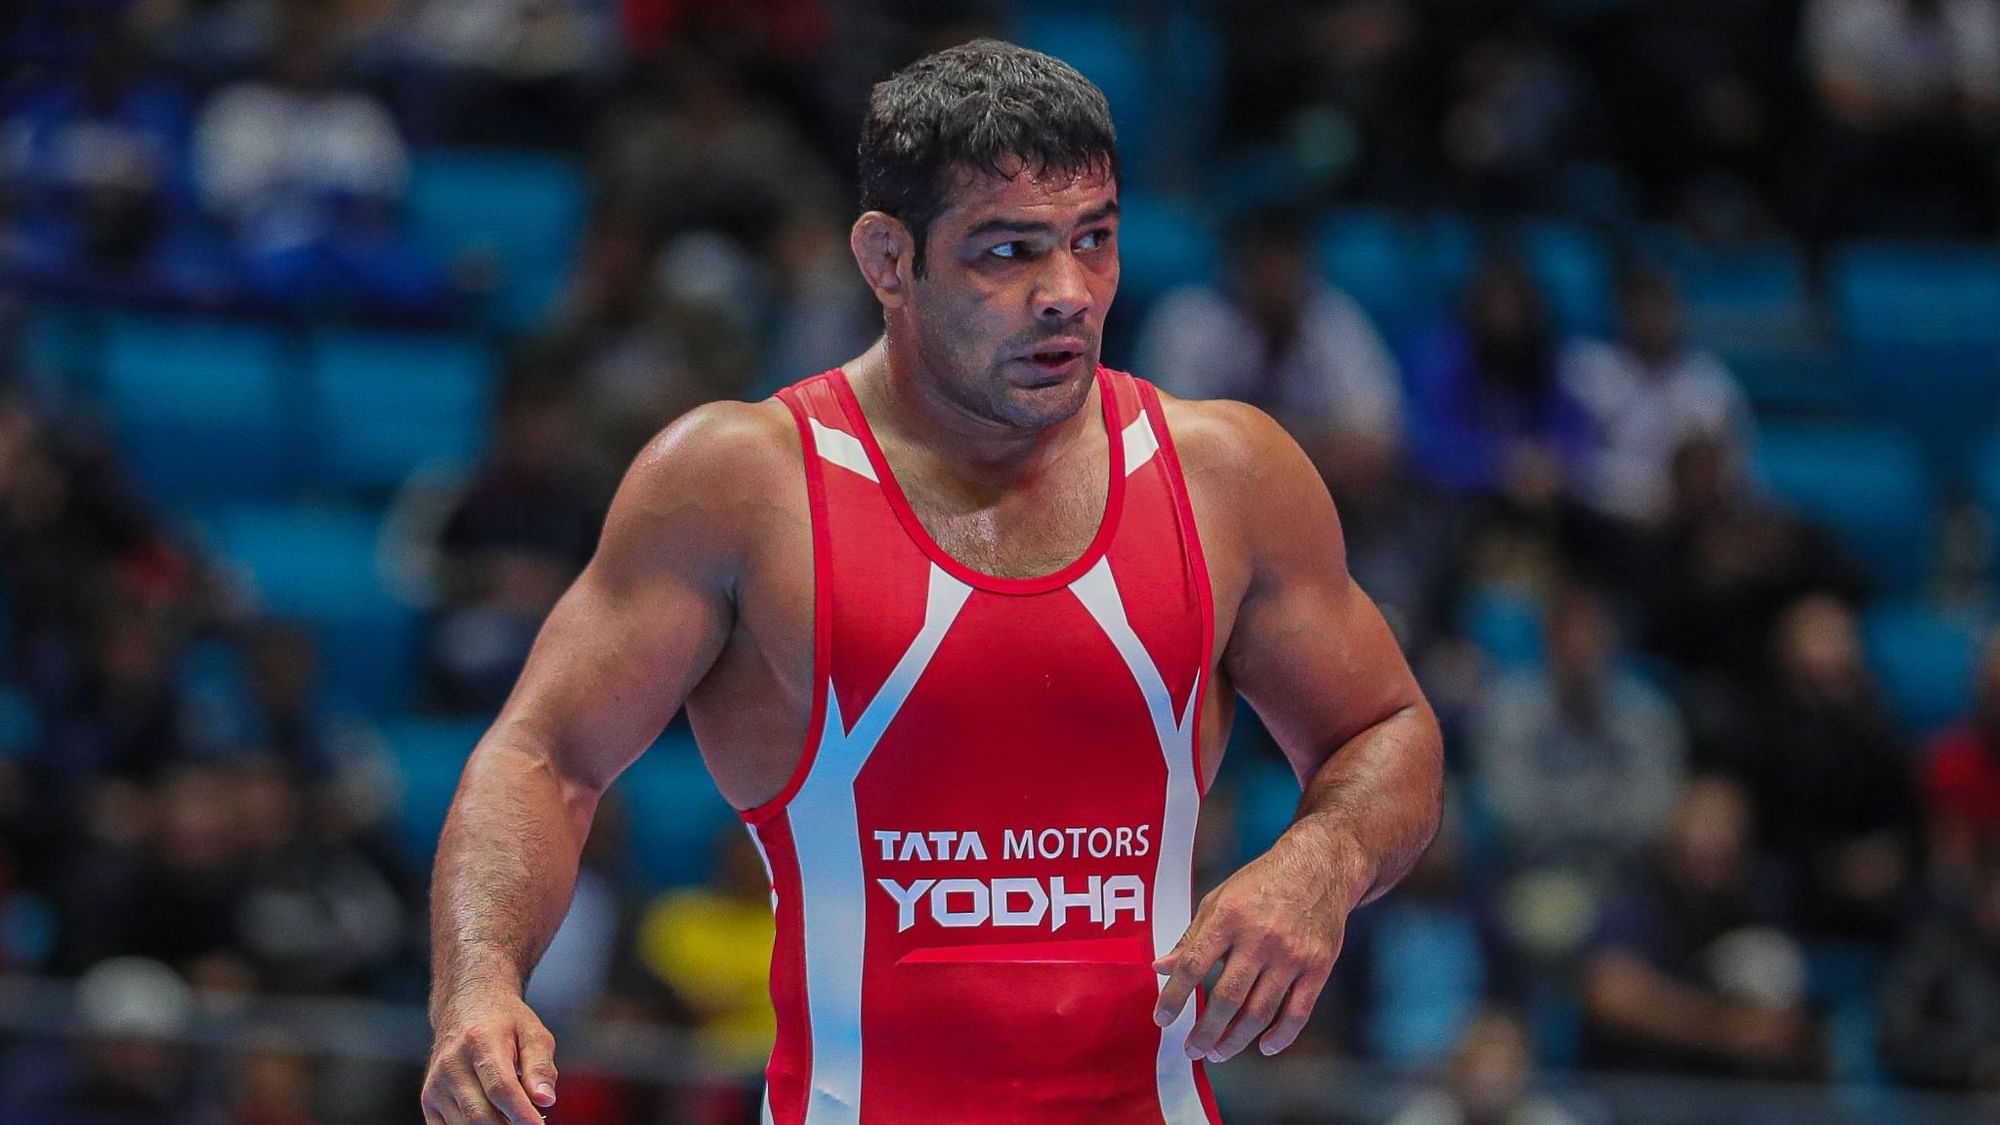 Sushil Kumar is India’s most decorated wrestler.